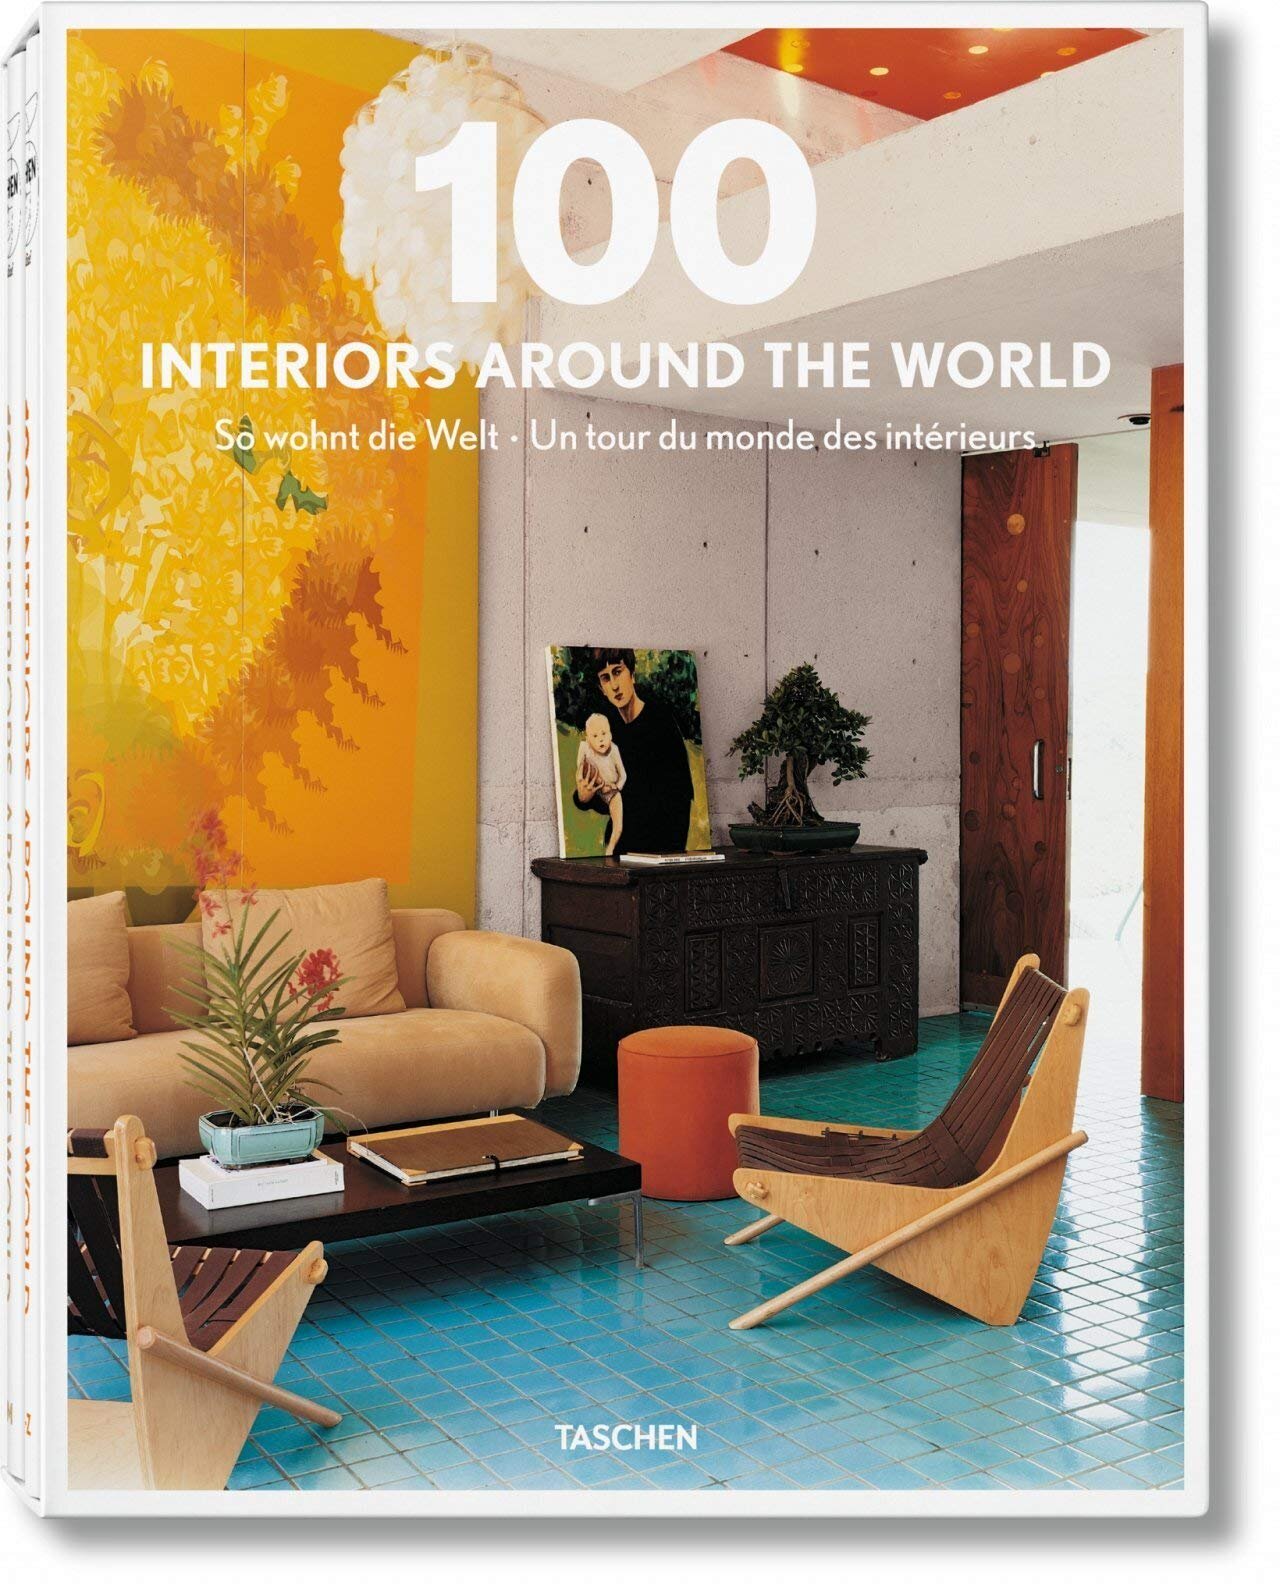 10 interior design styles, people, products, and trends I'm crushing on right now - 100 Interiors Around the World Books.